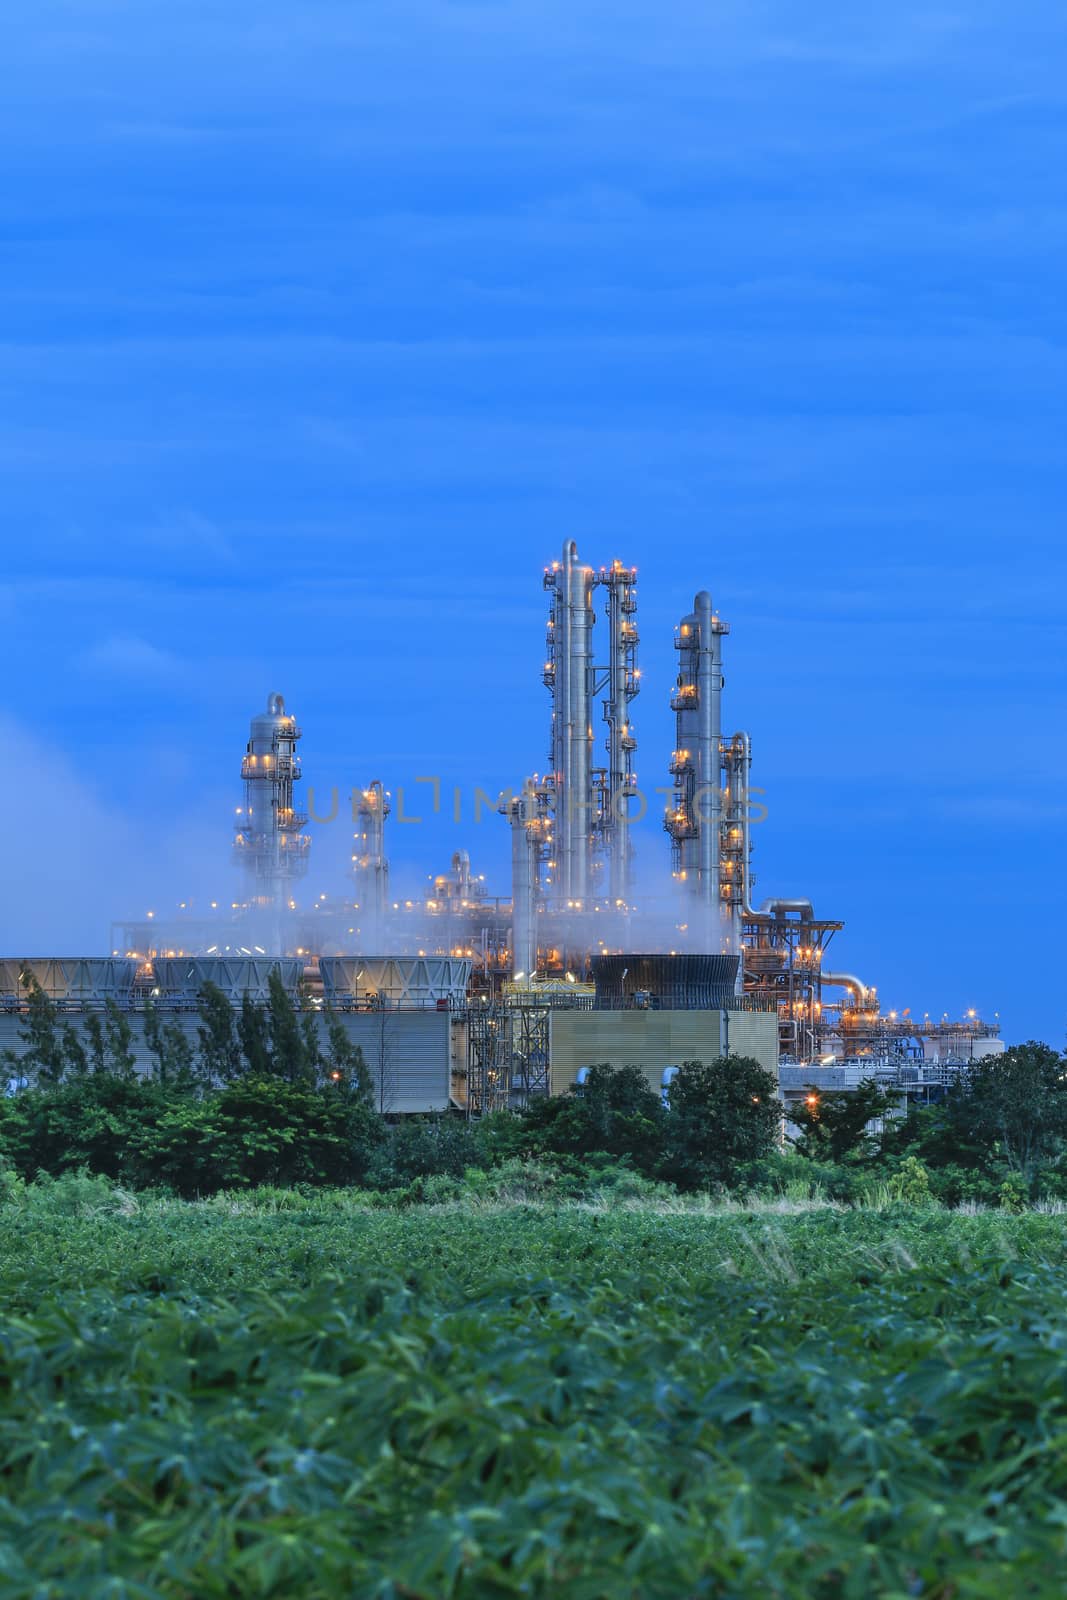 Lighting on structure of oil and chemical refinery plant on twilight time